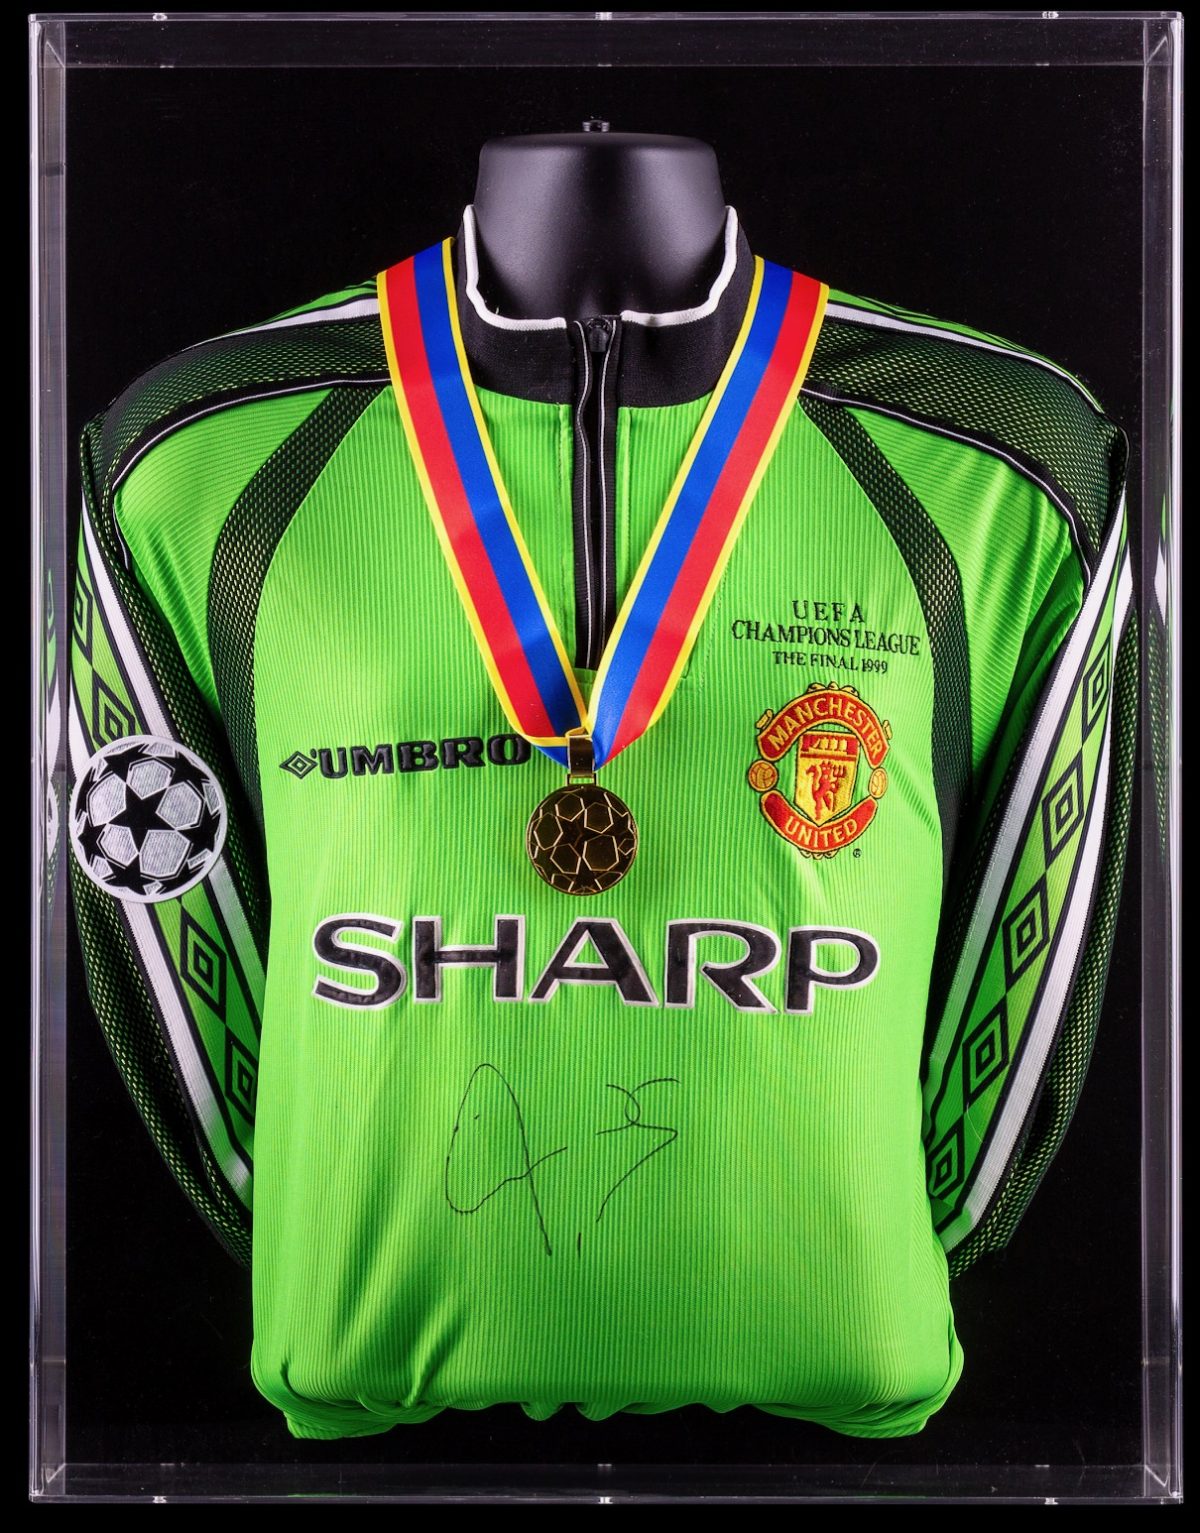 Peter Schmeichel Signed UEFA Champions League Final 1999 Manchester United Shirt & Medal Display